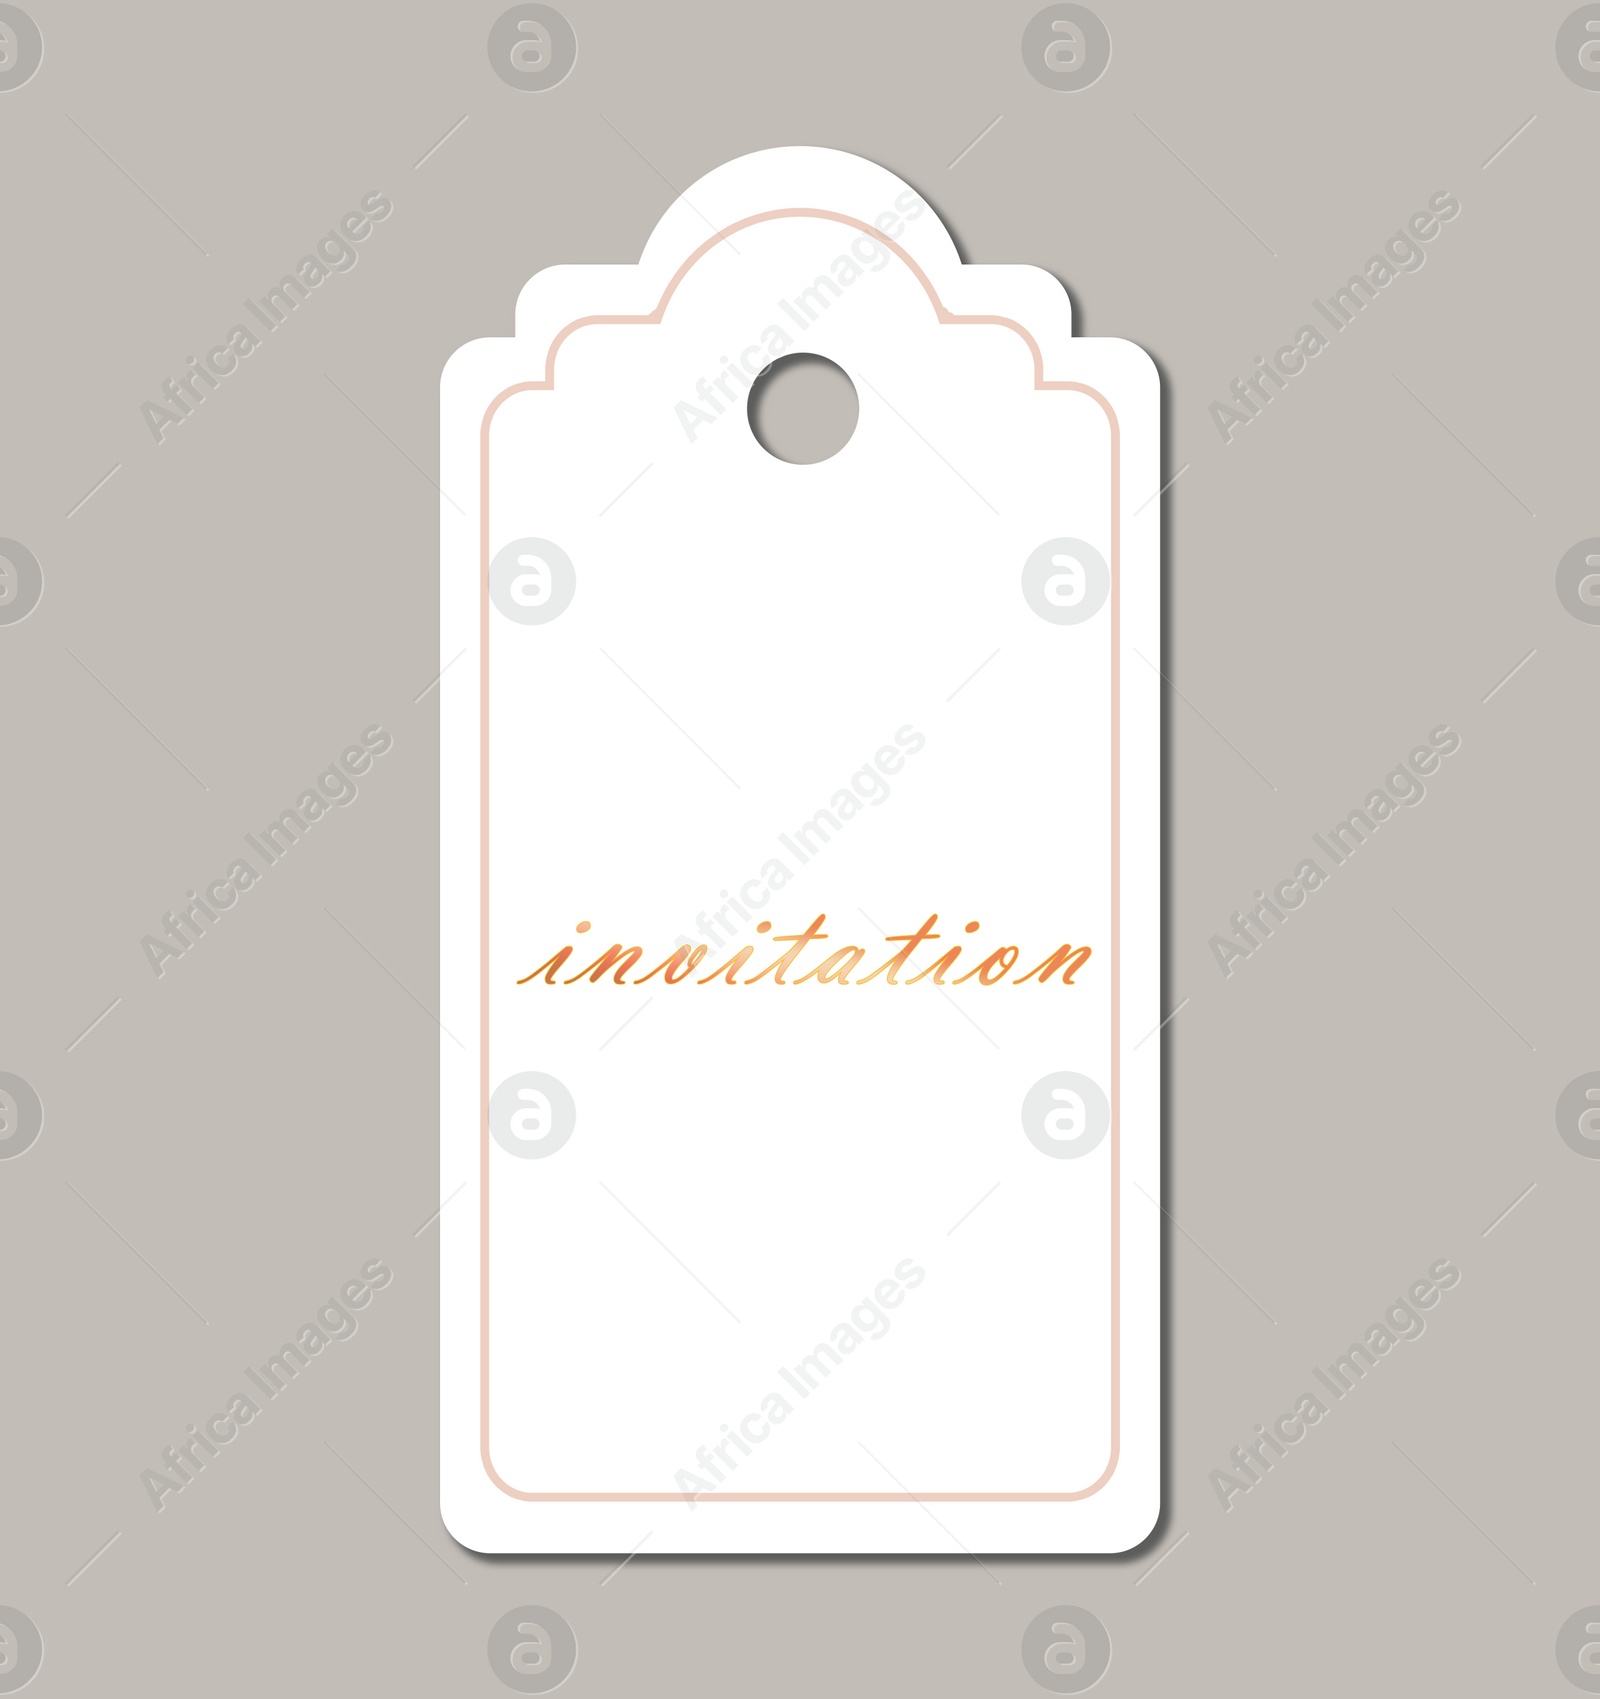 Illustration of Wedding invitation tag on grey background, top view